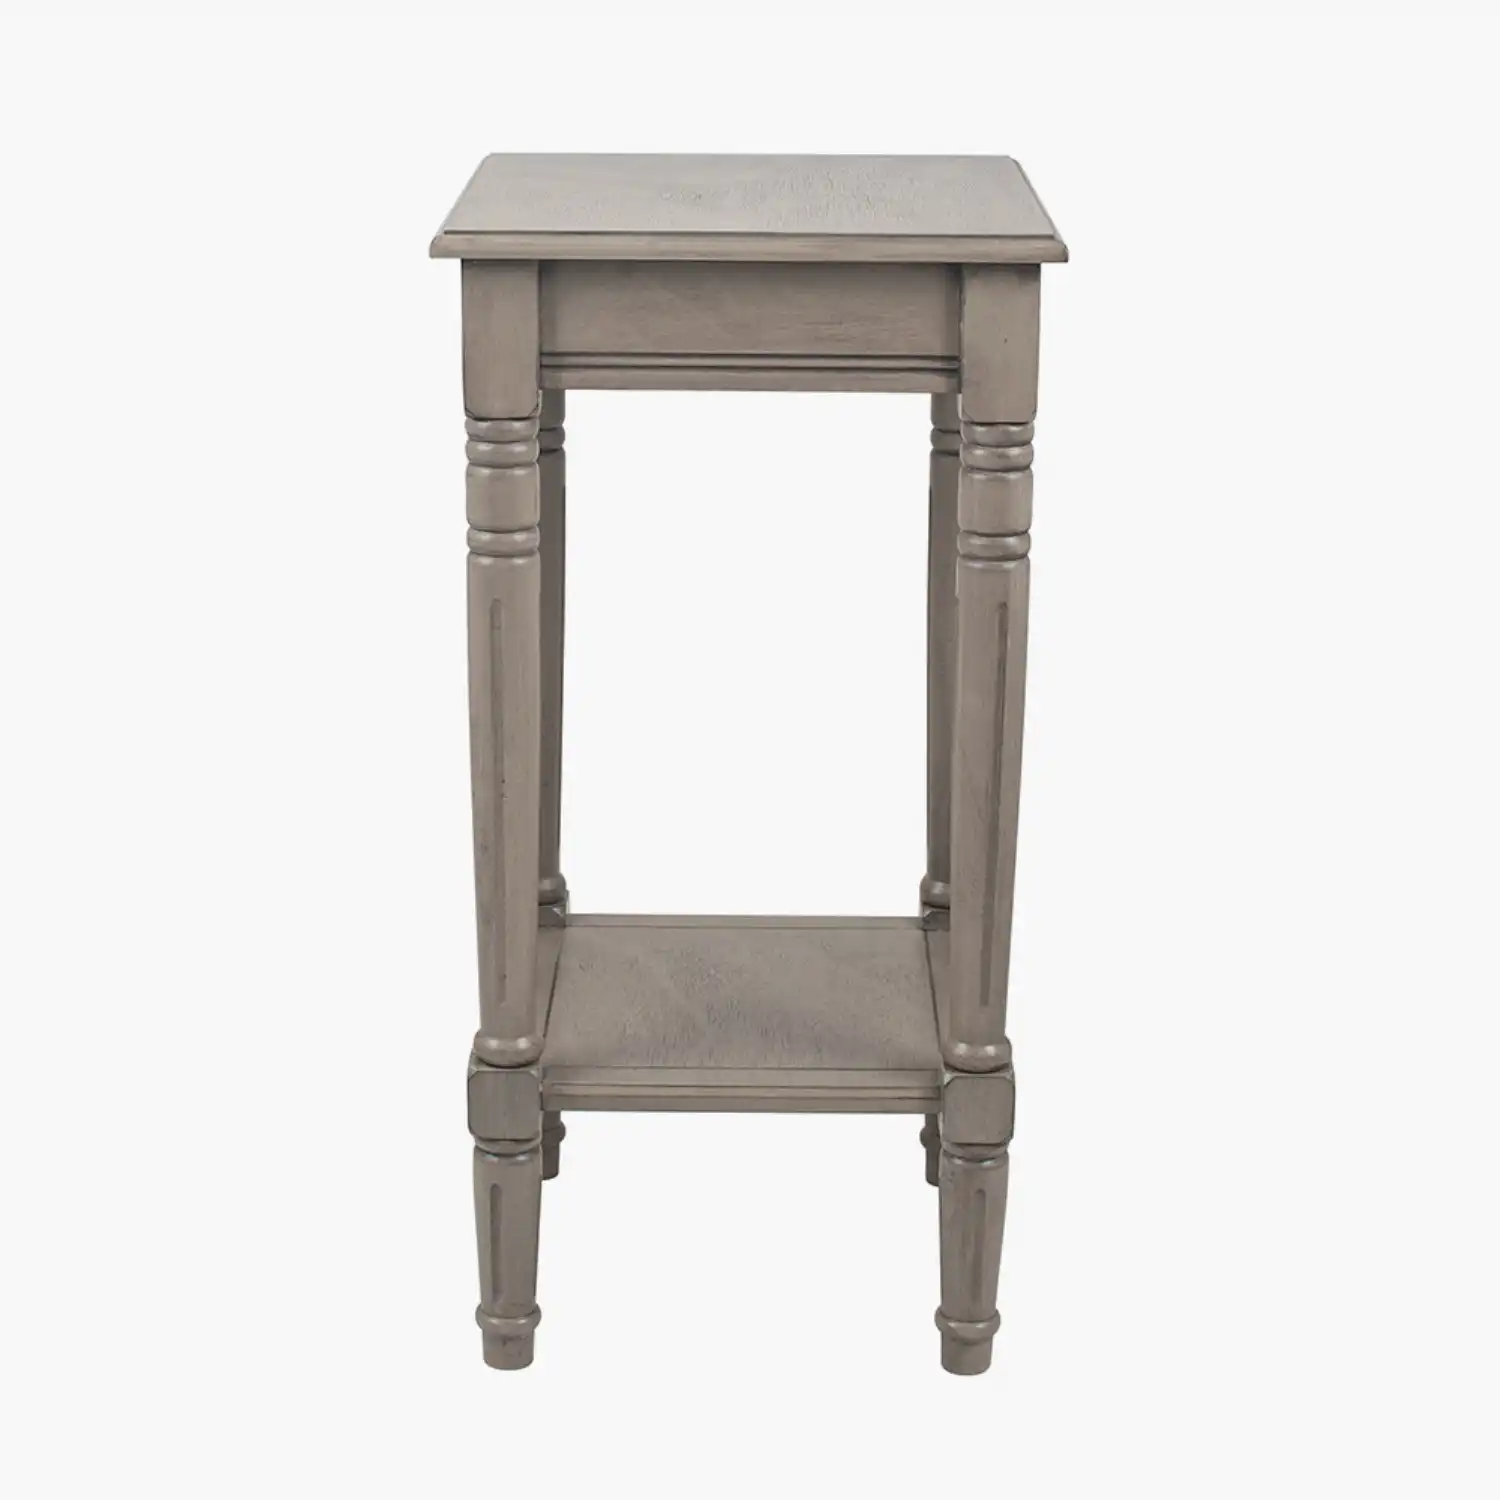 Taupe Pine Wood Square Accent Table KD